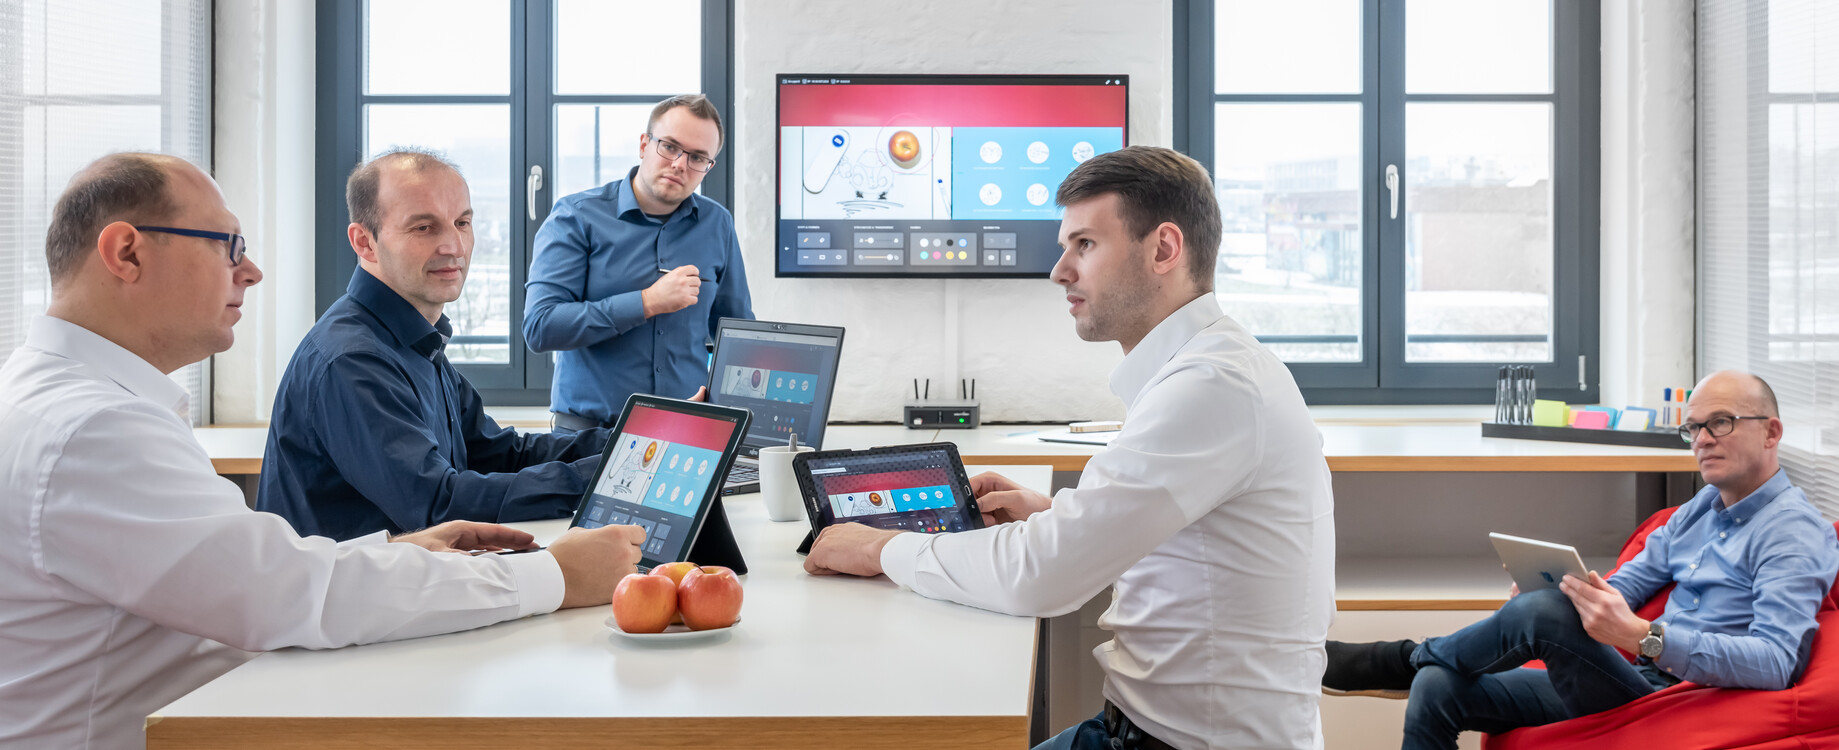 Wireless collaboration tools for meetings